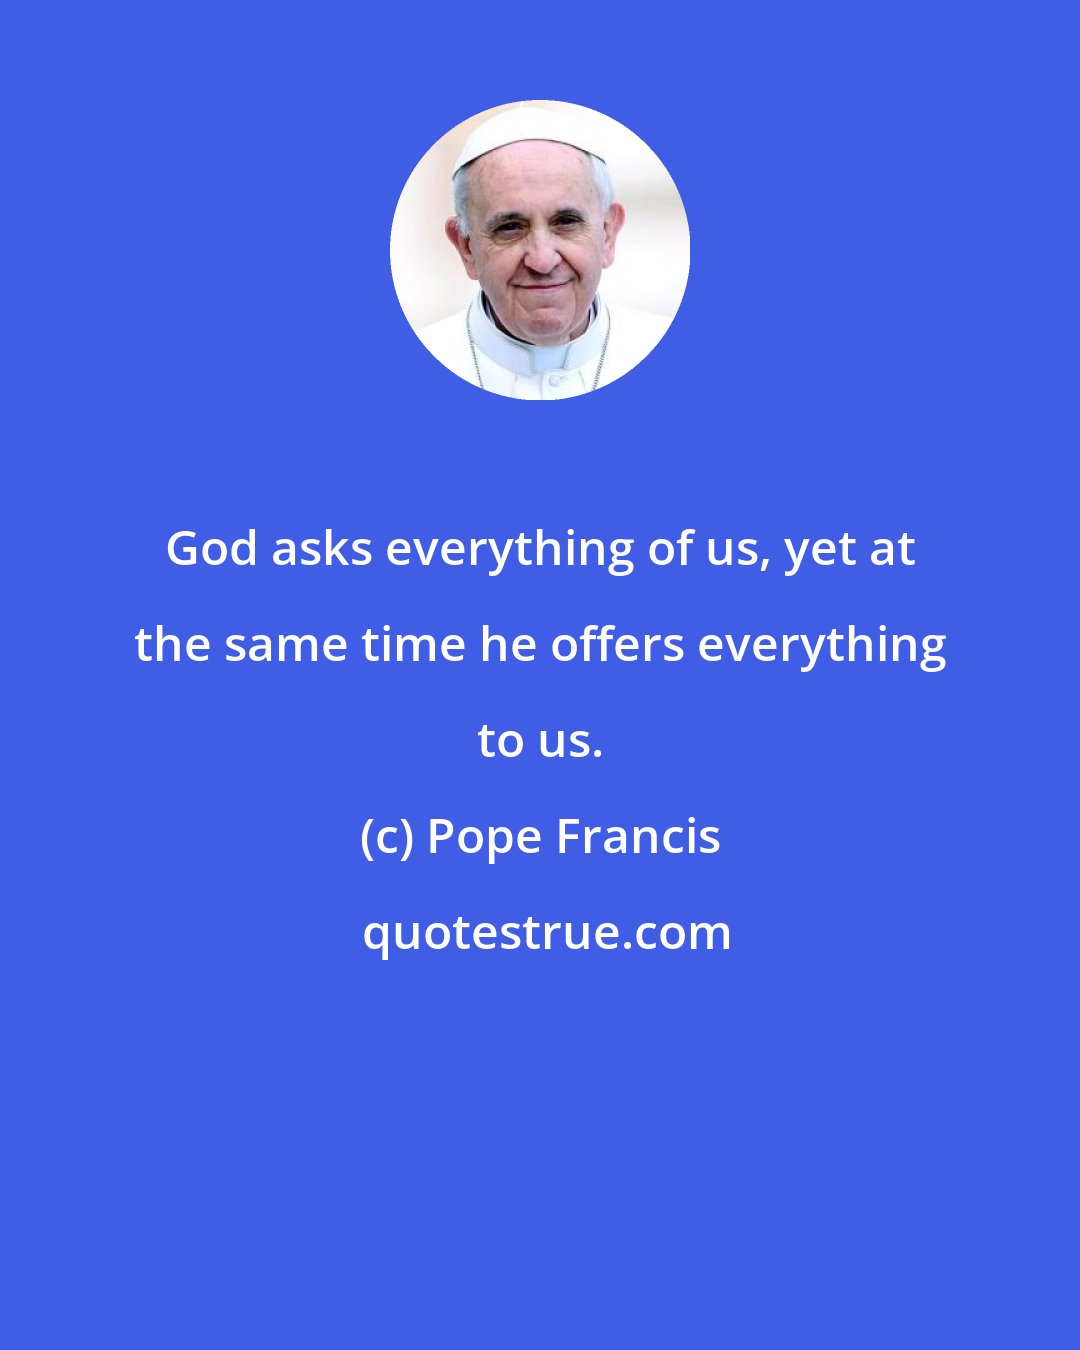 Pope Francis: God asks everything of us, yet at the same time he offers everything to us.